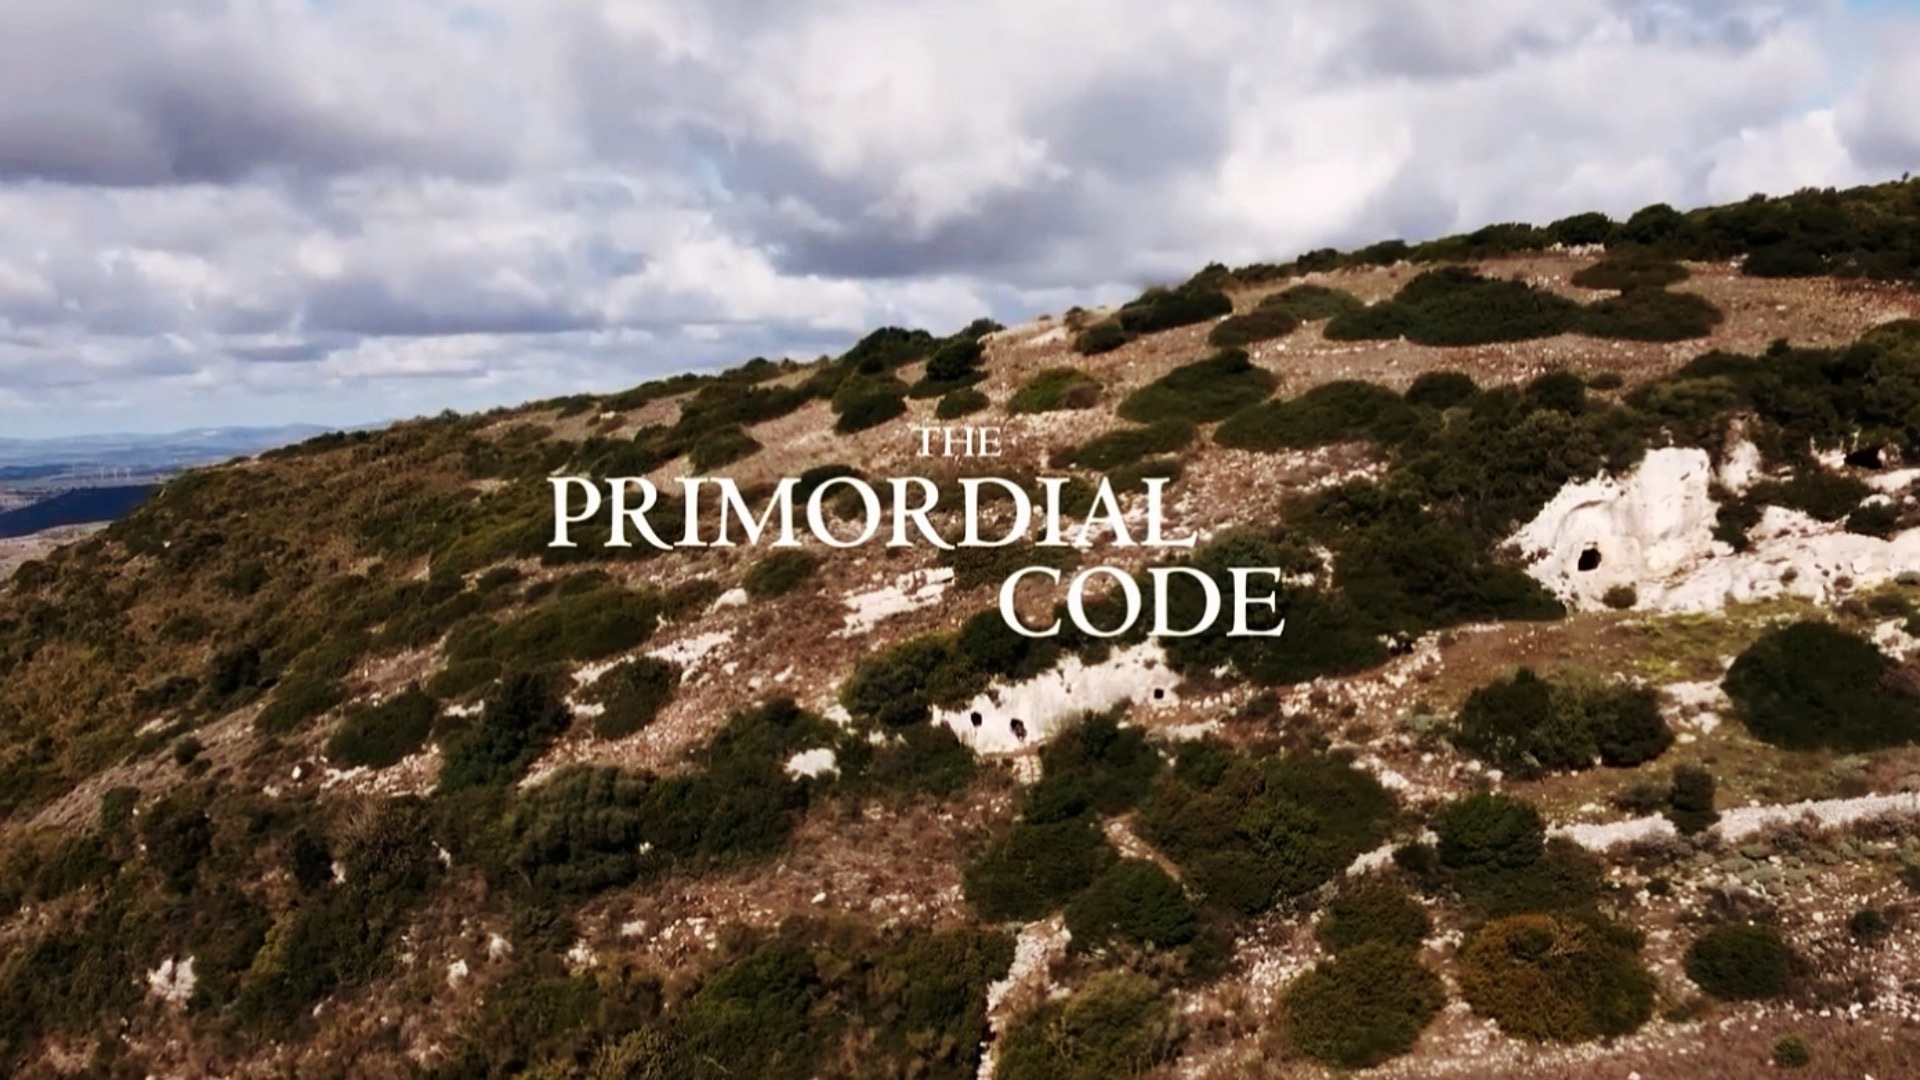 The Primordial Code | documentary by Marijn Poels